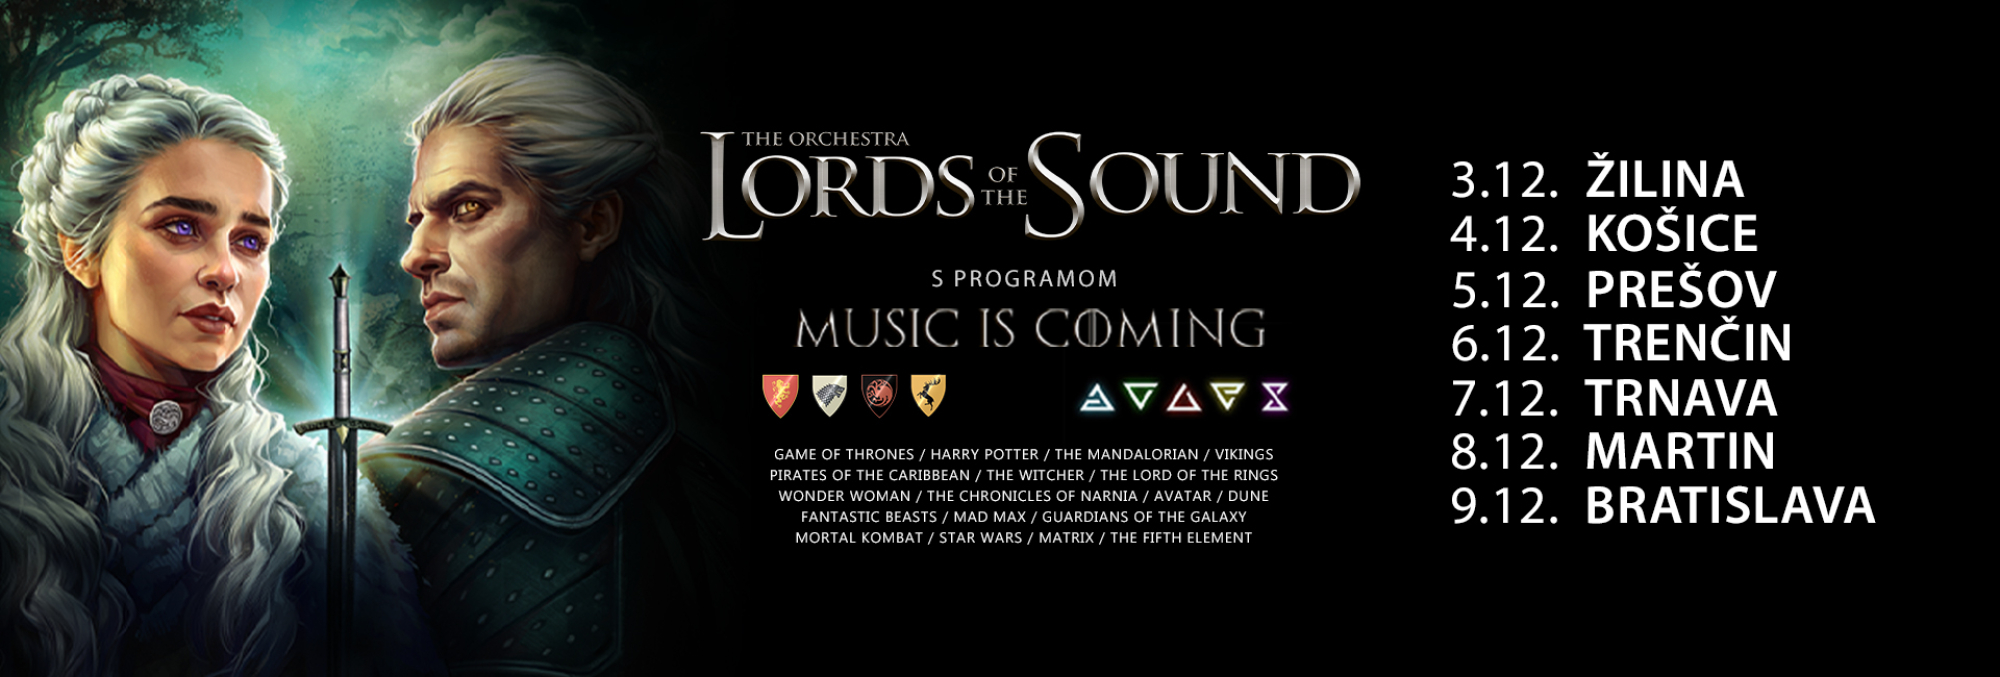 LORDS OF THE SOUND s obnoveným programom «Music is coming»